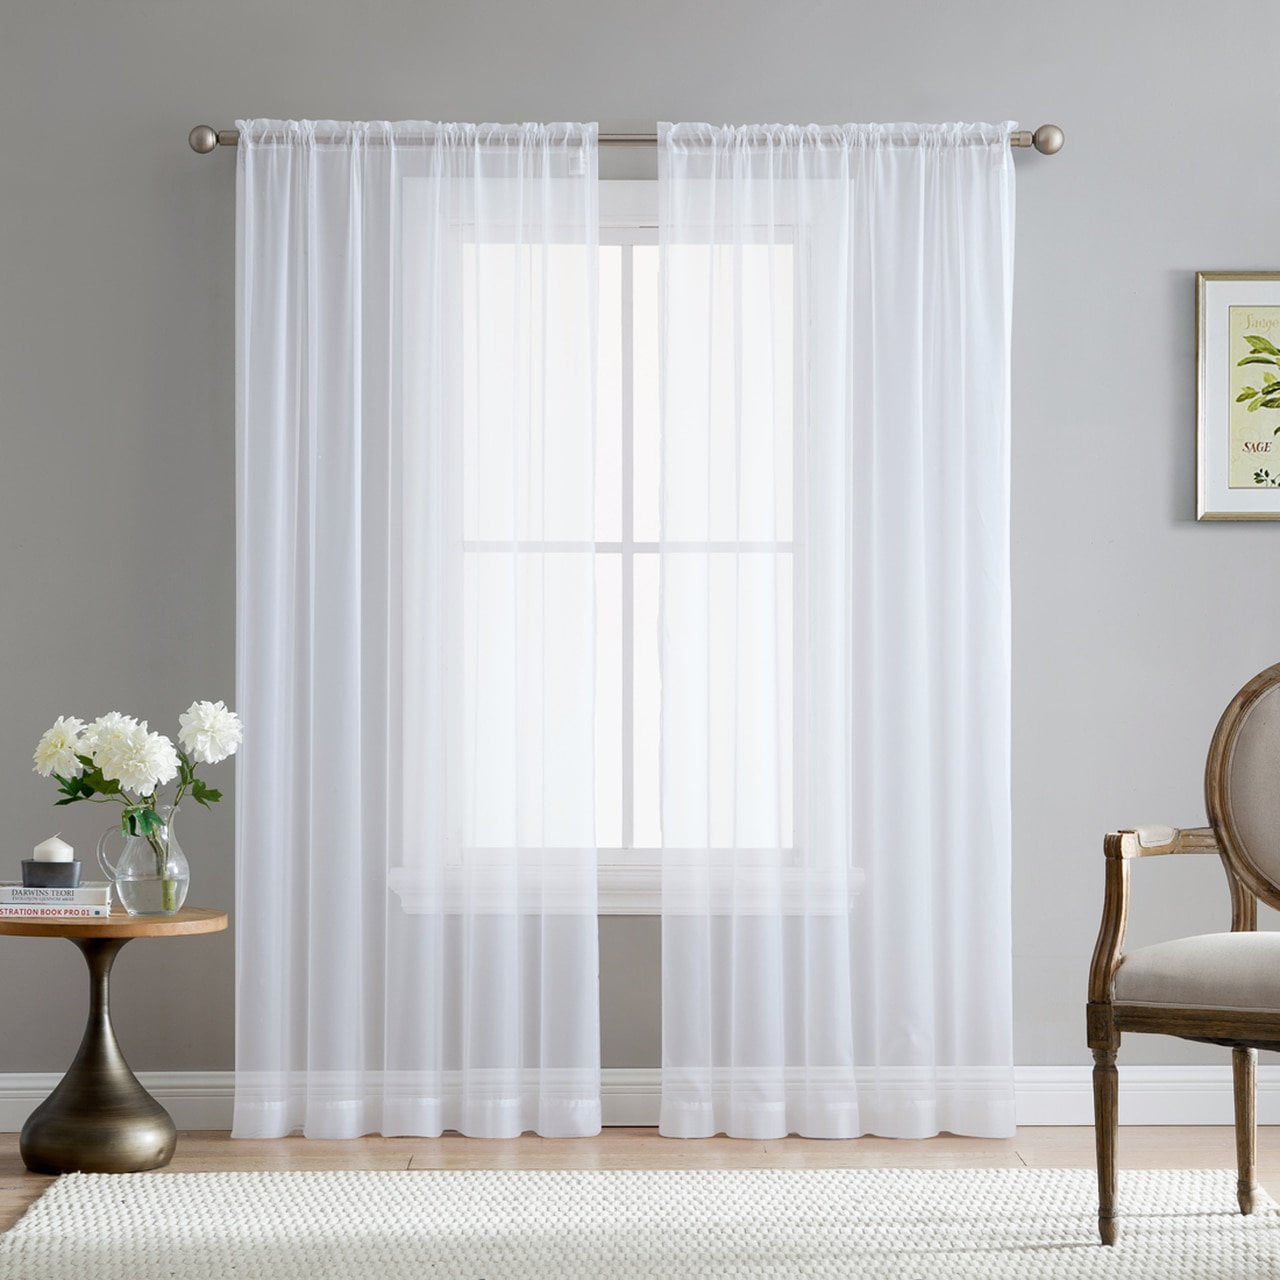 Empire Home Sheer Voile Window Curtain Drapes Short Panel 84" Long Solid Colors 